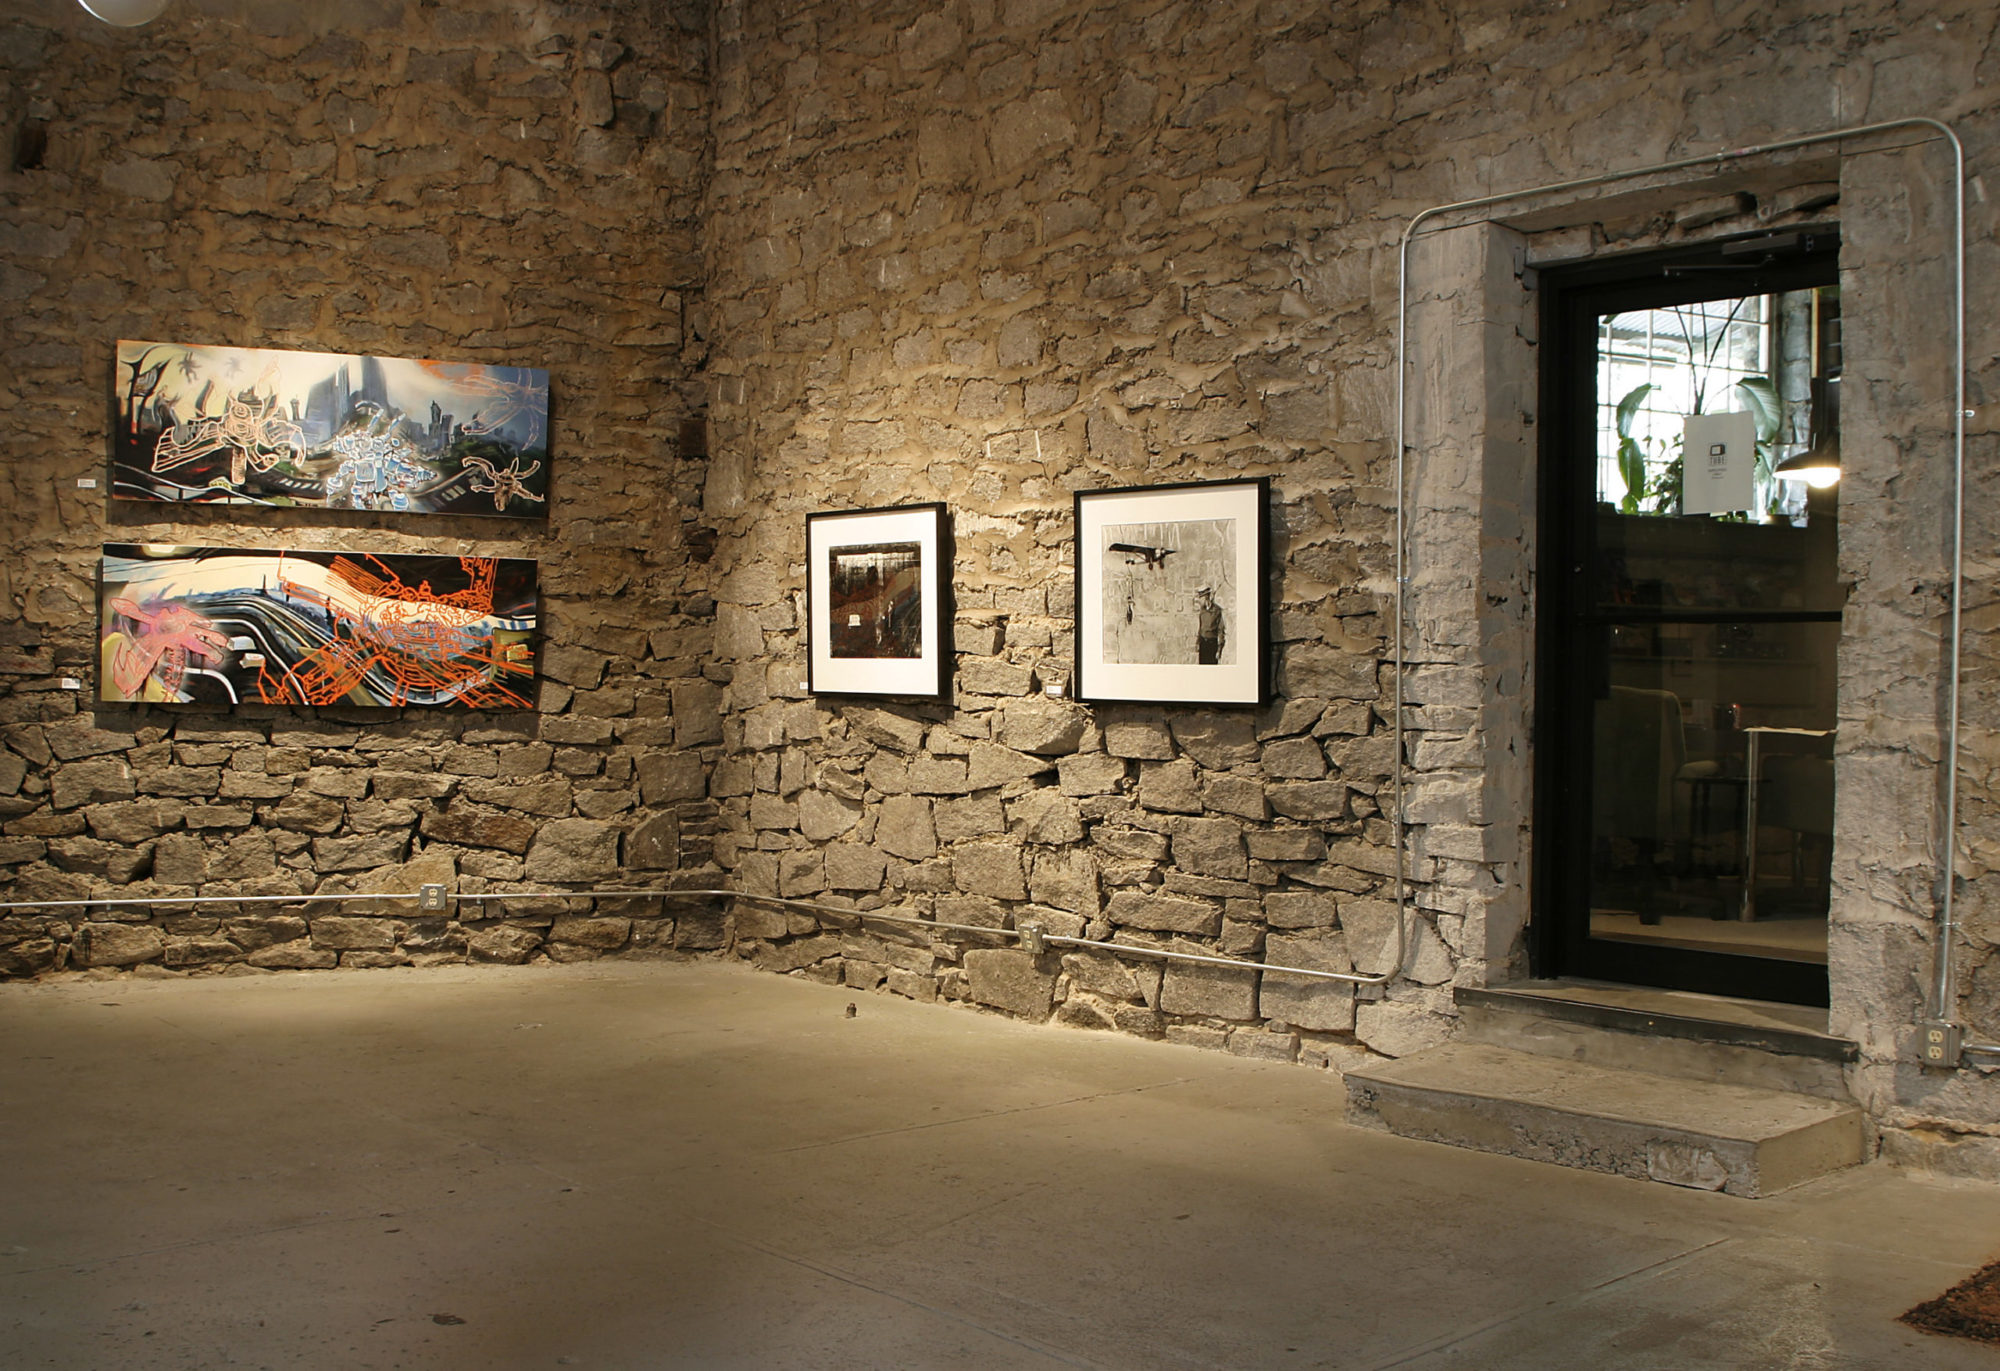 A photo of an installation, with a concrete floor and stone walls. Four pieces of art hang on the wall, and there is a door on the right side of the image.